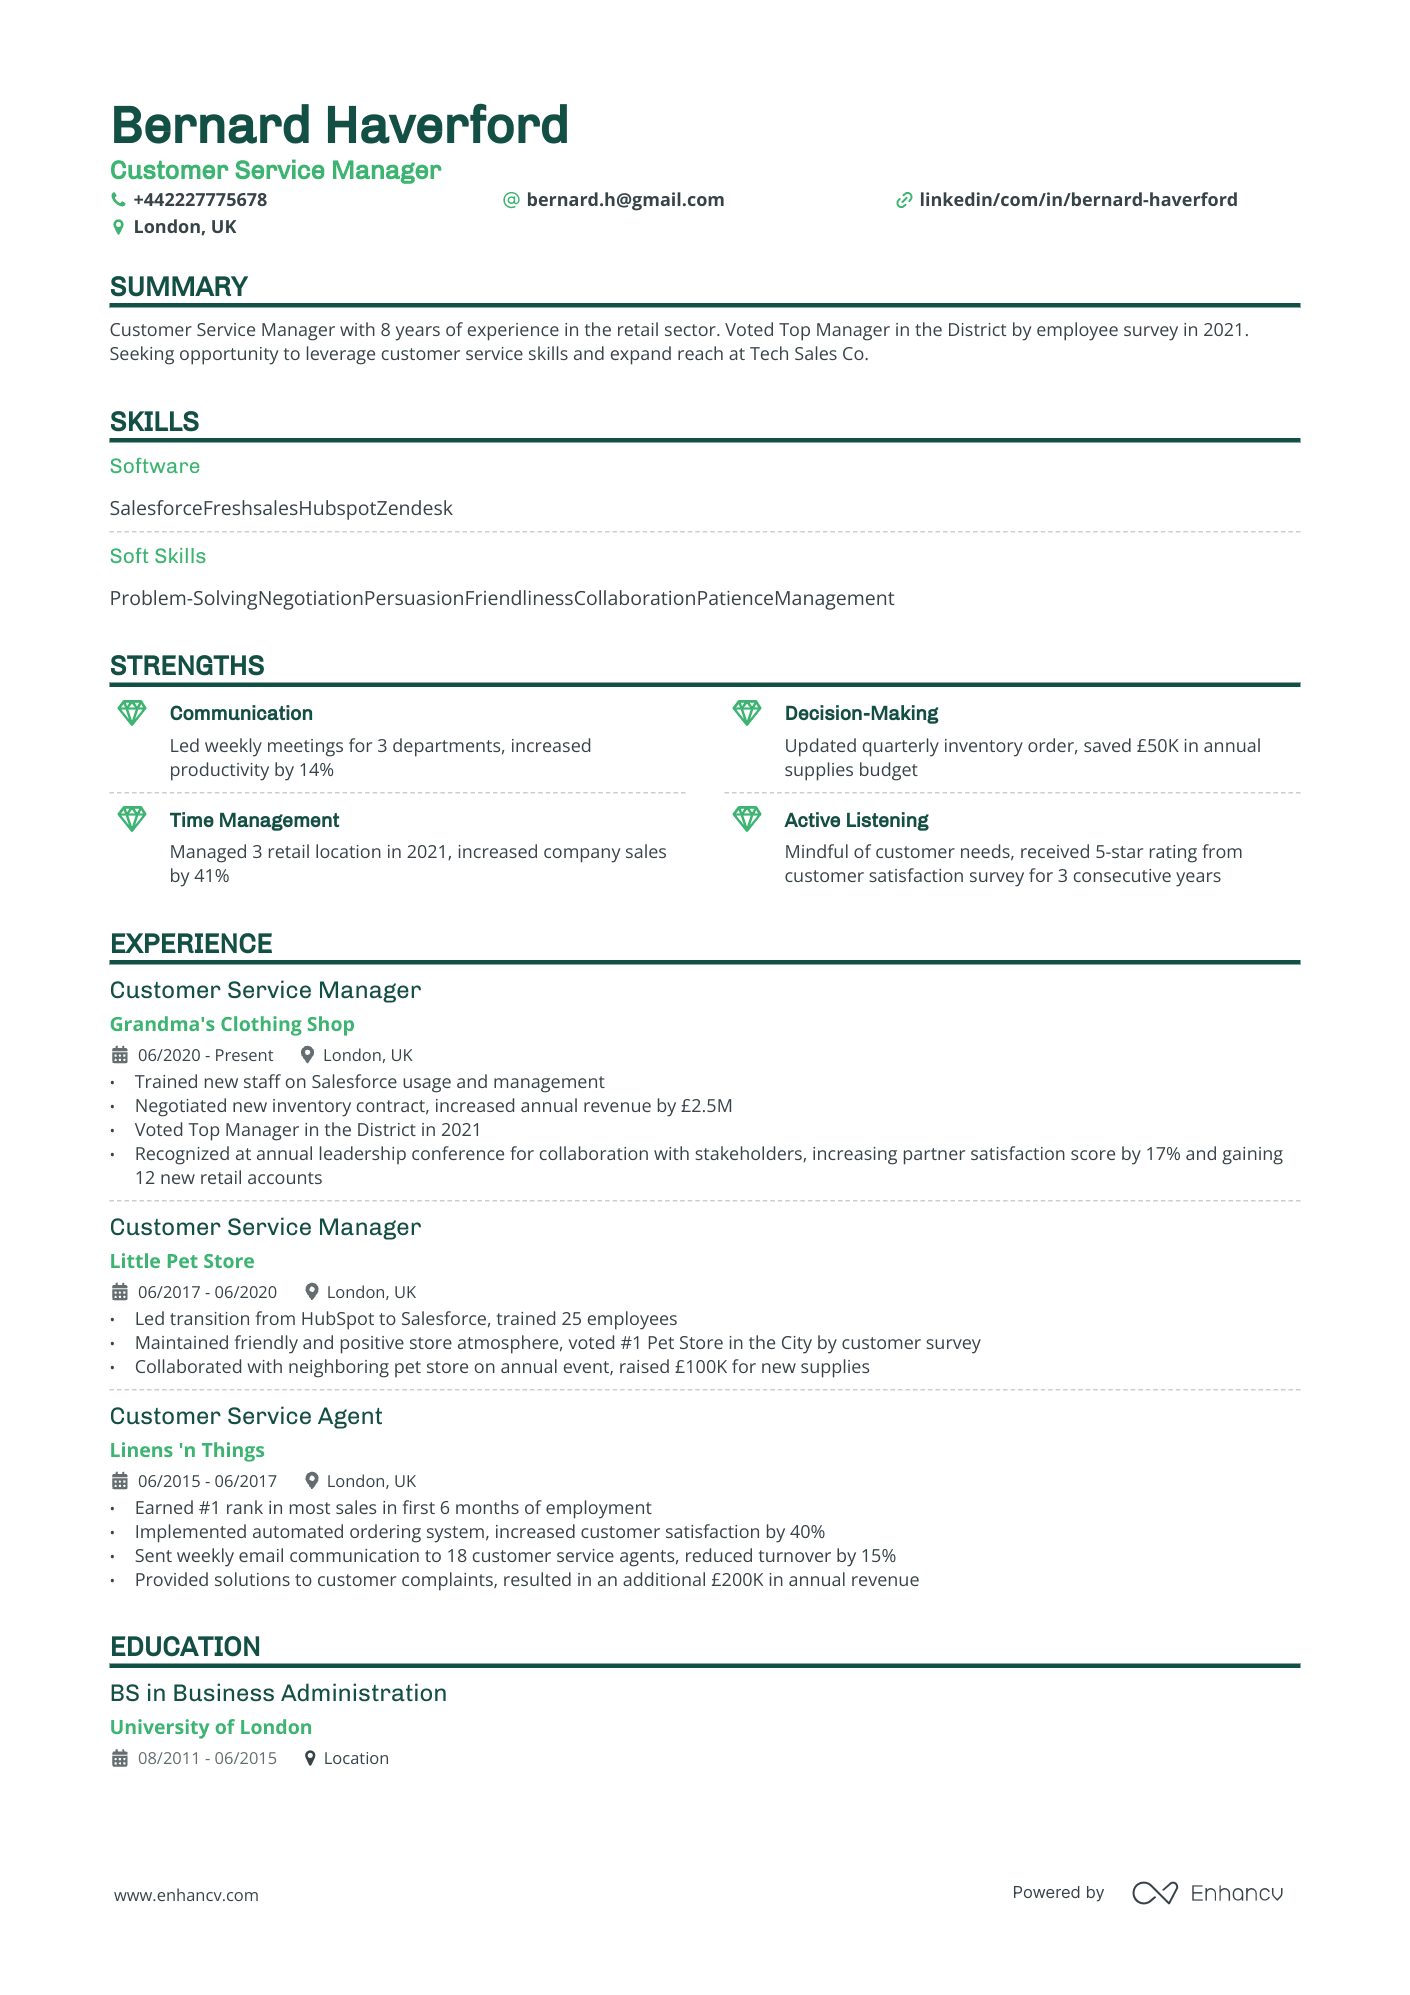 Customer Service Manager CV example